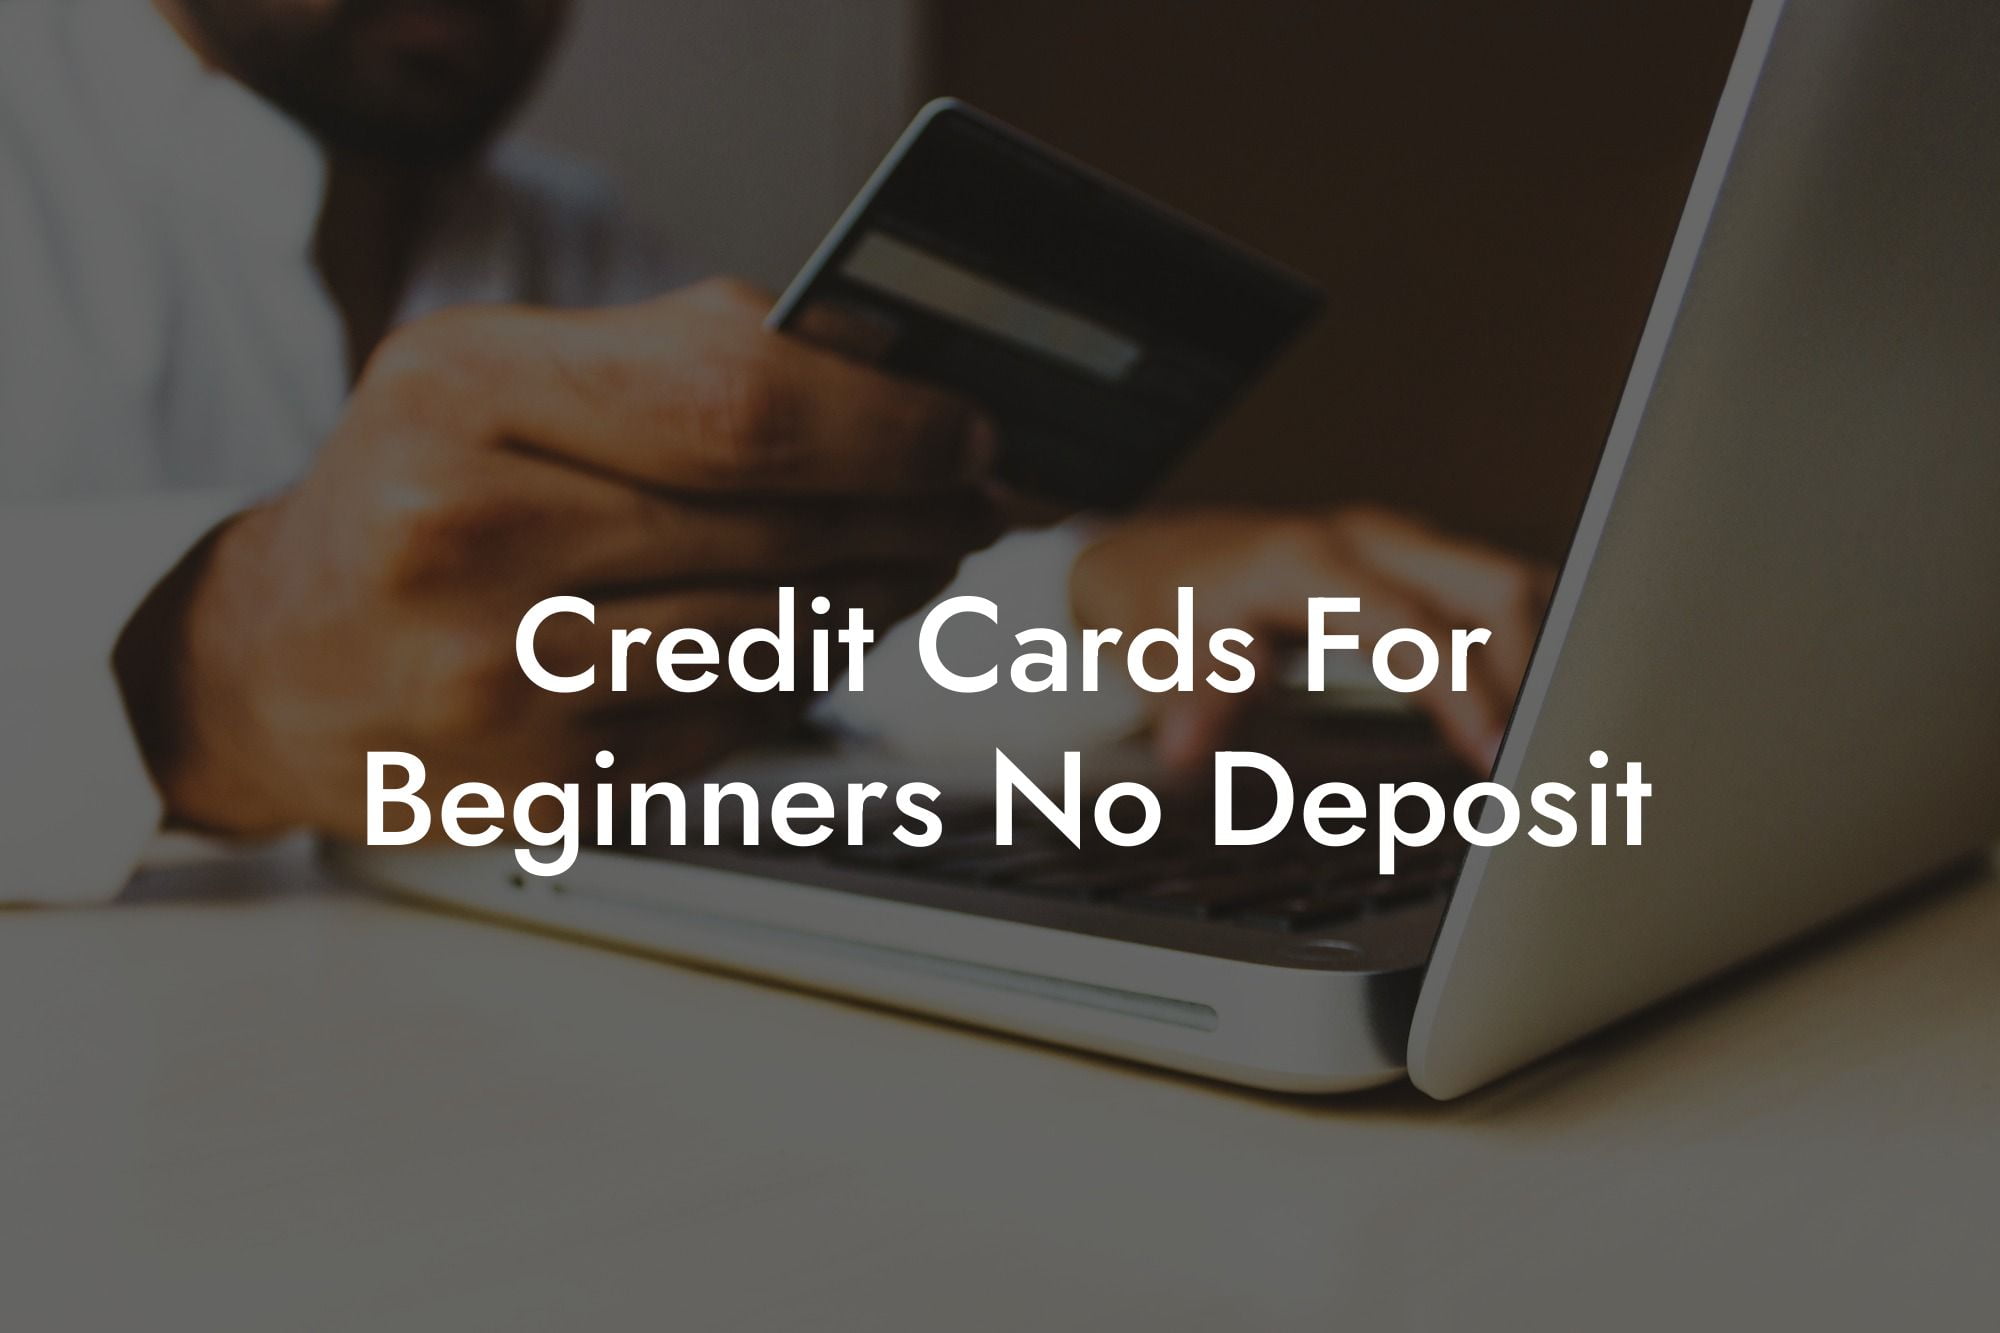 Credit Cards For Beginners No Deposit